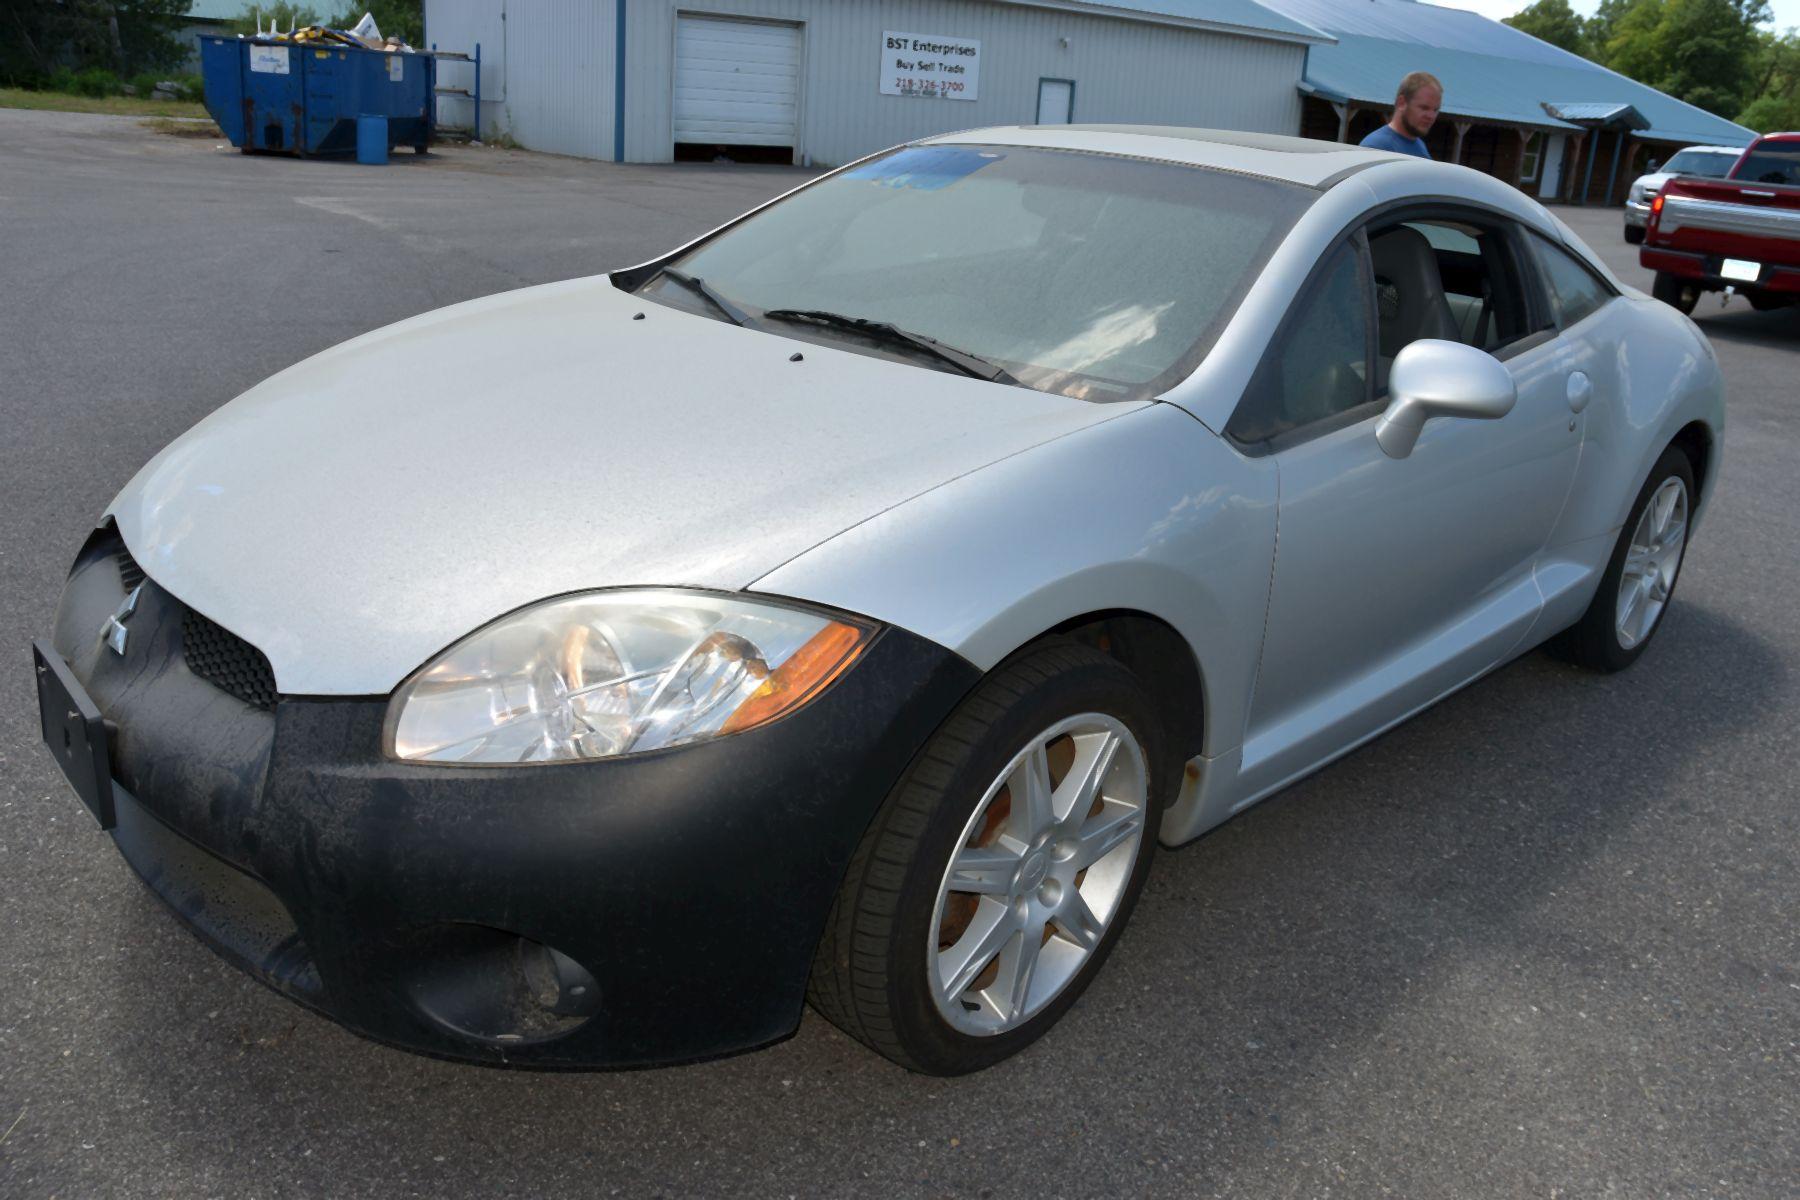 2007 Mitsubishi Eclipse SE, 2 Door, Sunroof, Gray, (noise in transmission)